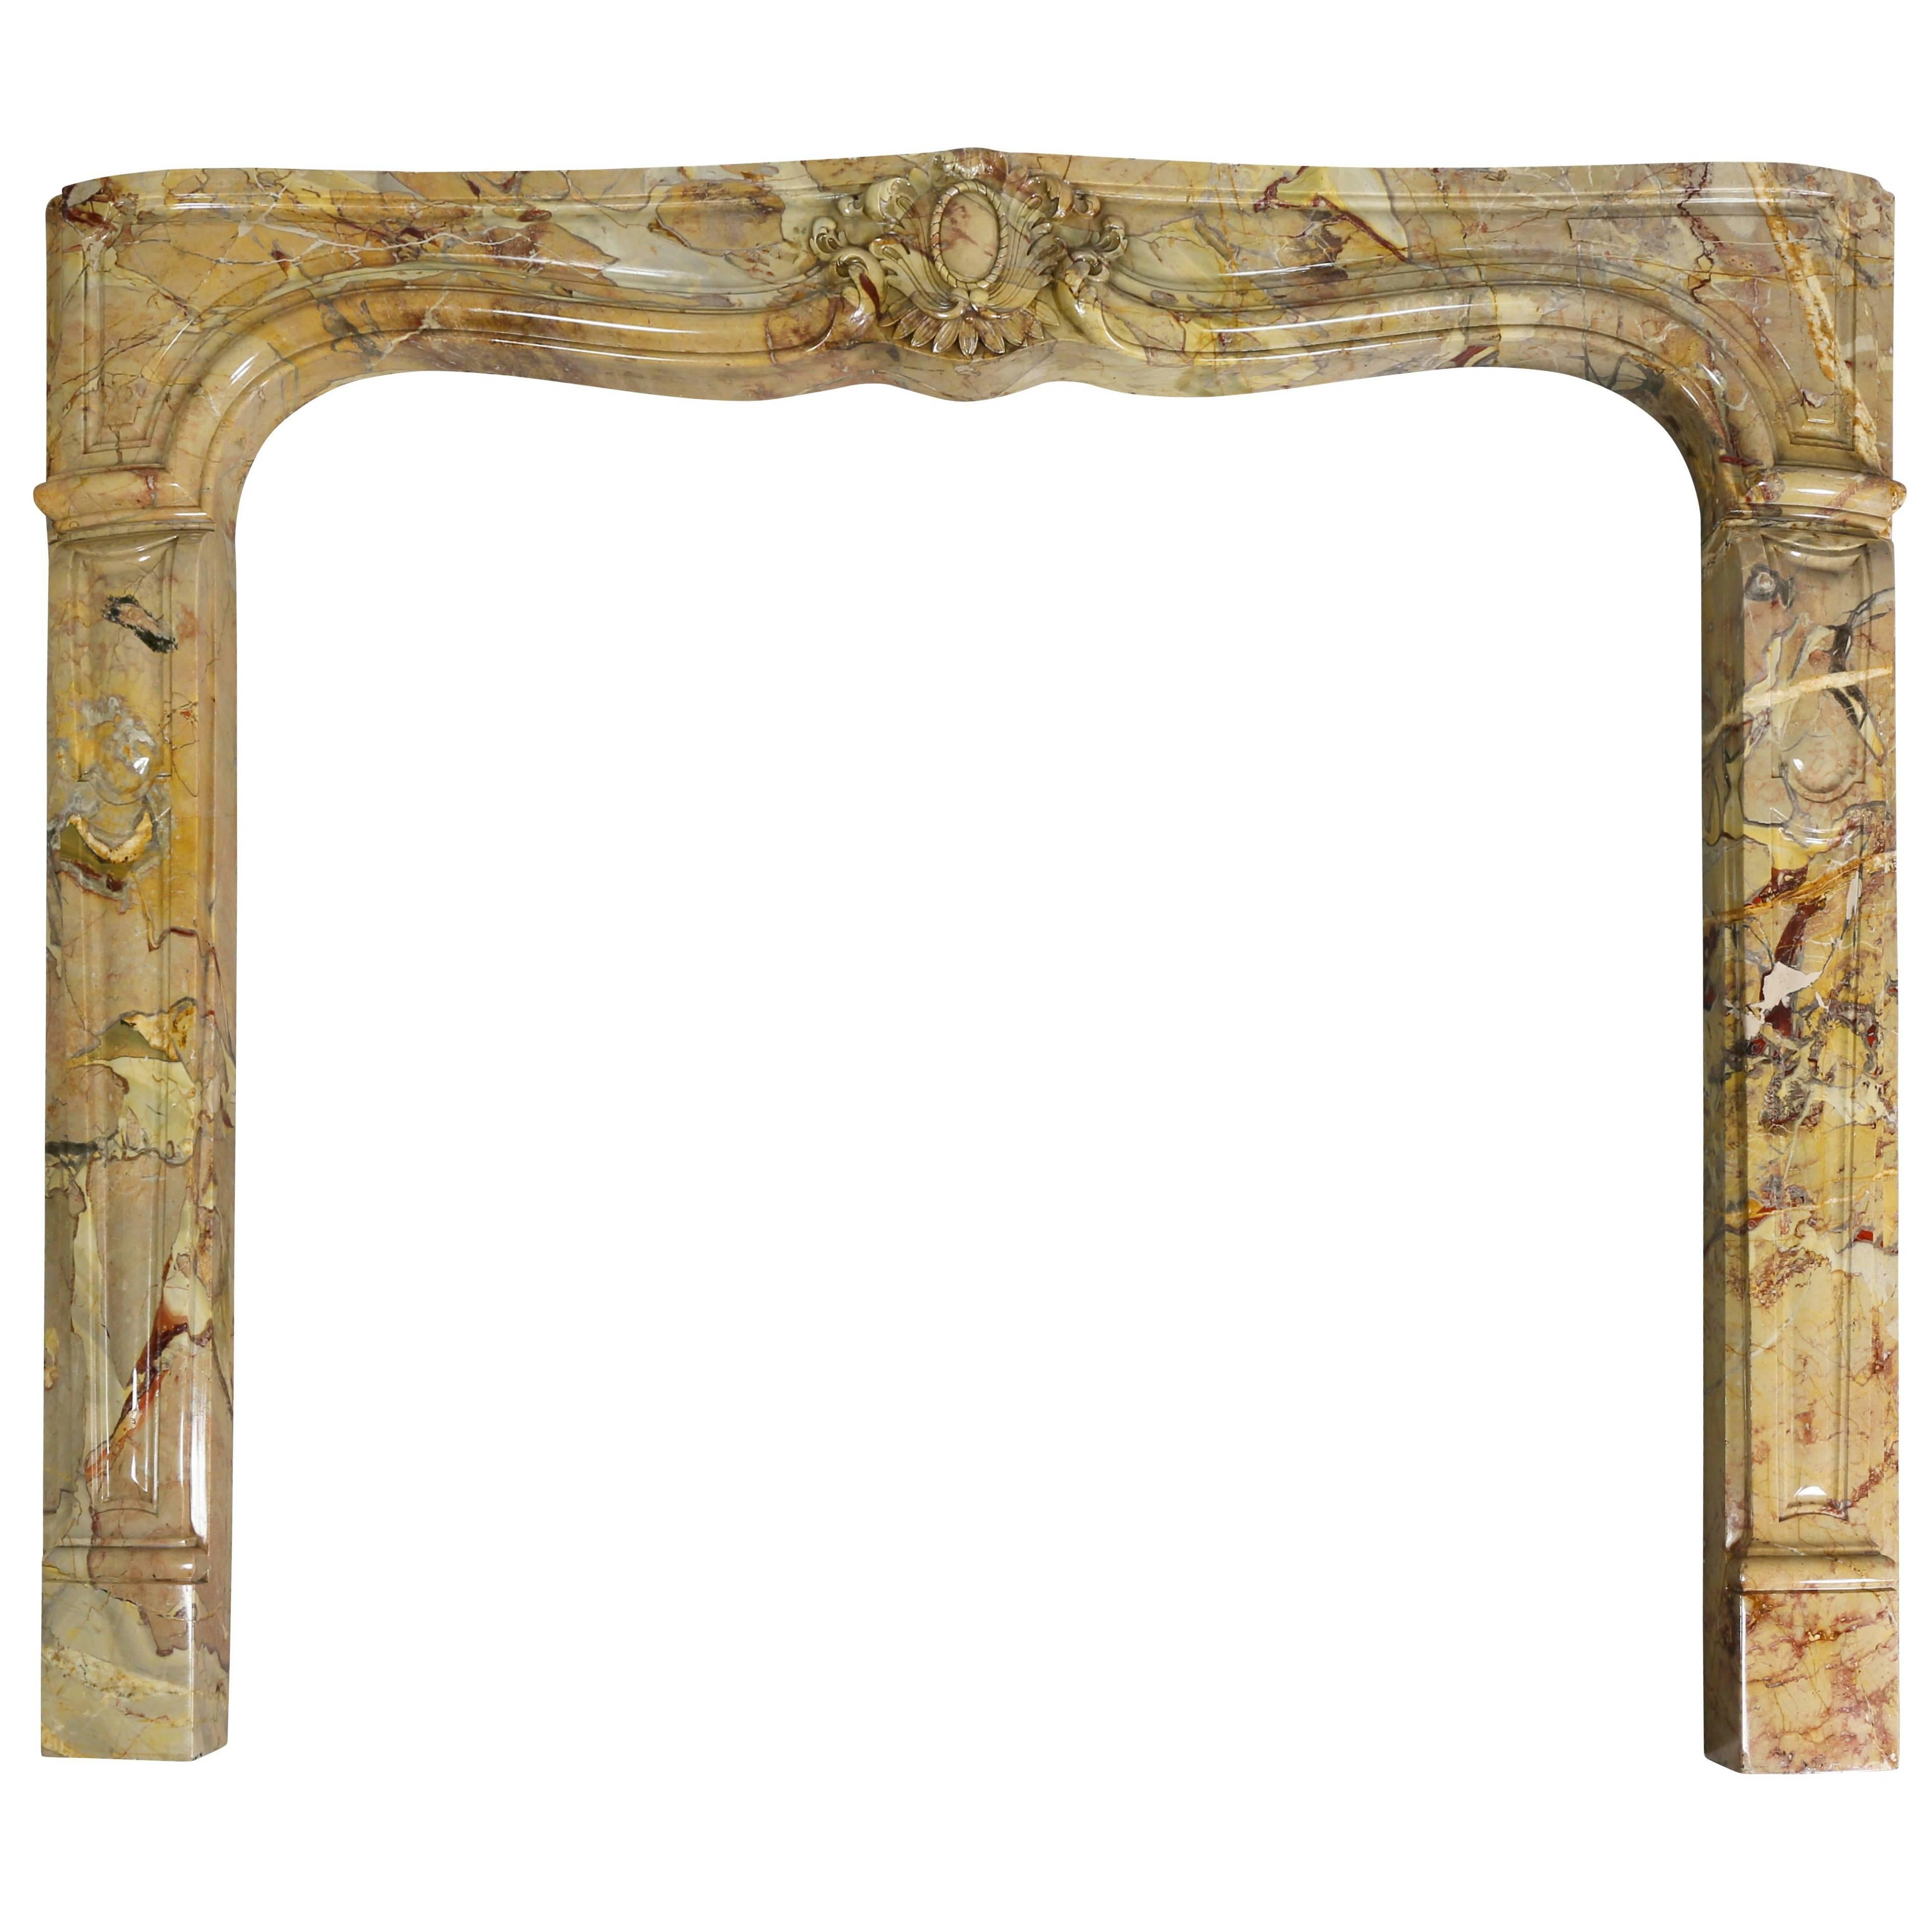 Louis XV Style Sarrancolin Framboise Marble Mantlepiece